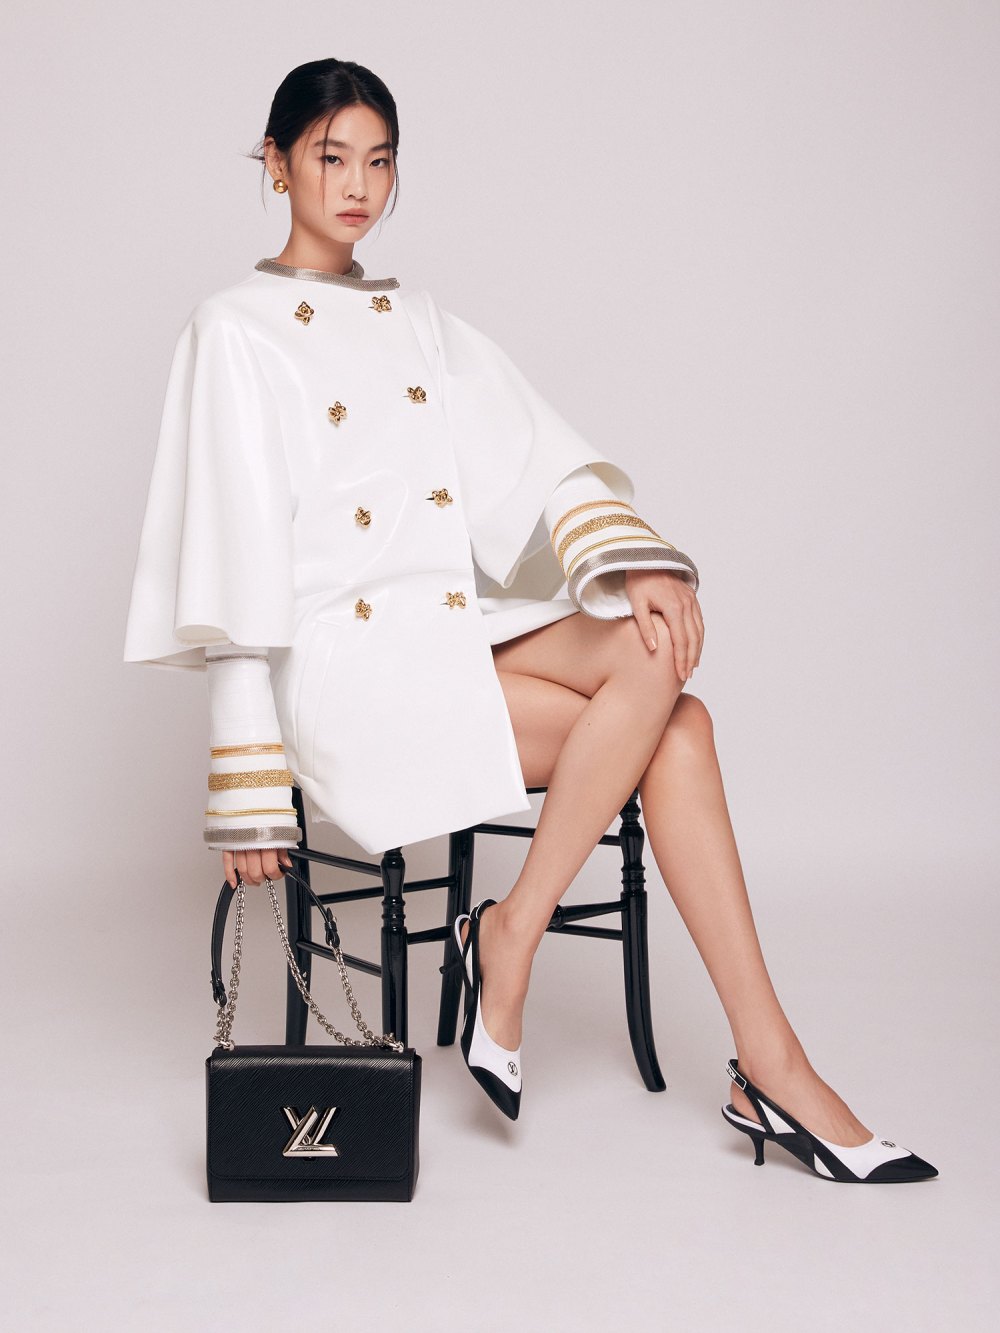 HoYeon Jung from 'Squid Game' Is Louis Vuitton's Newest Global Ambassador